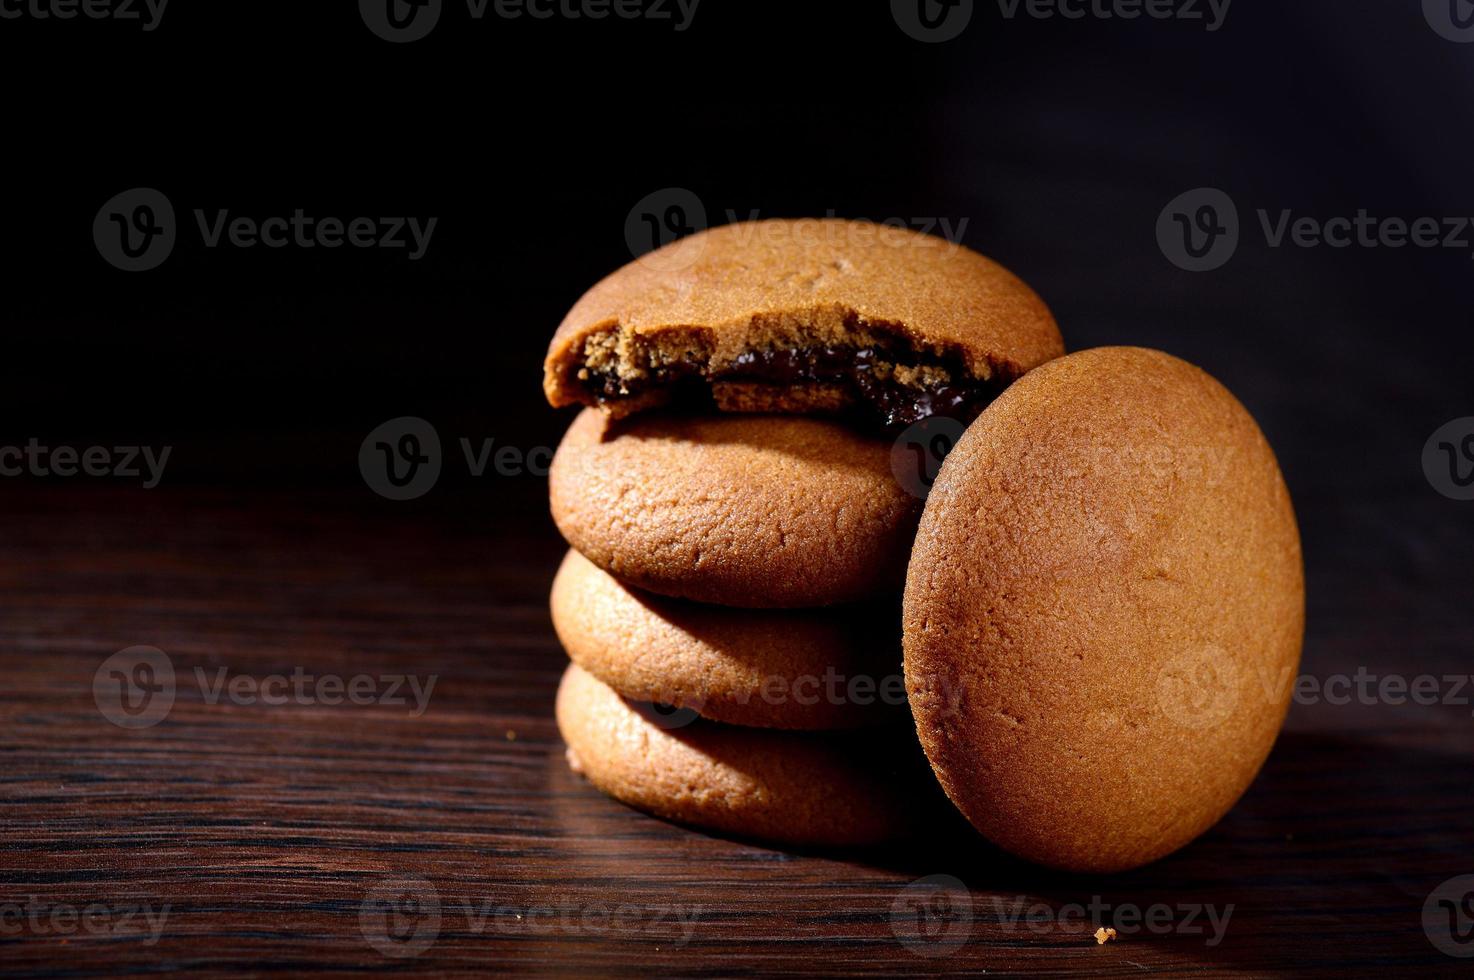 Biscuits filled with chocolate cream. Chocolate cream cookies. brown chocolate biscuits with cream filling on black background. photo